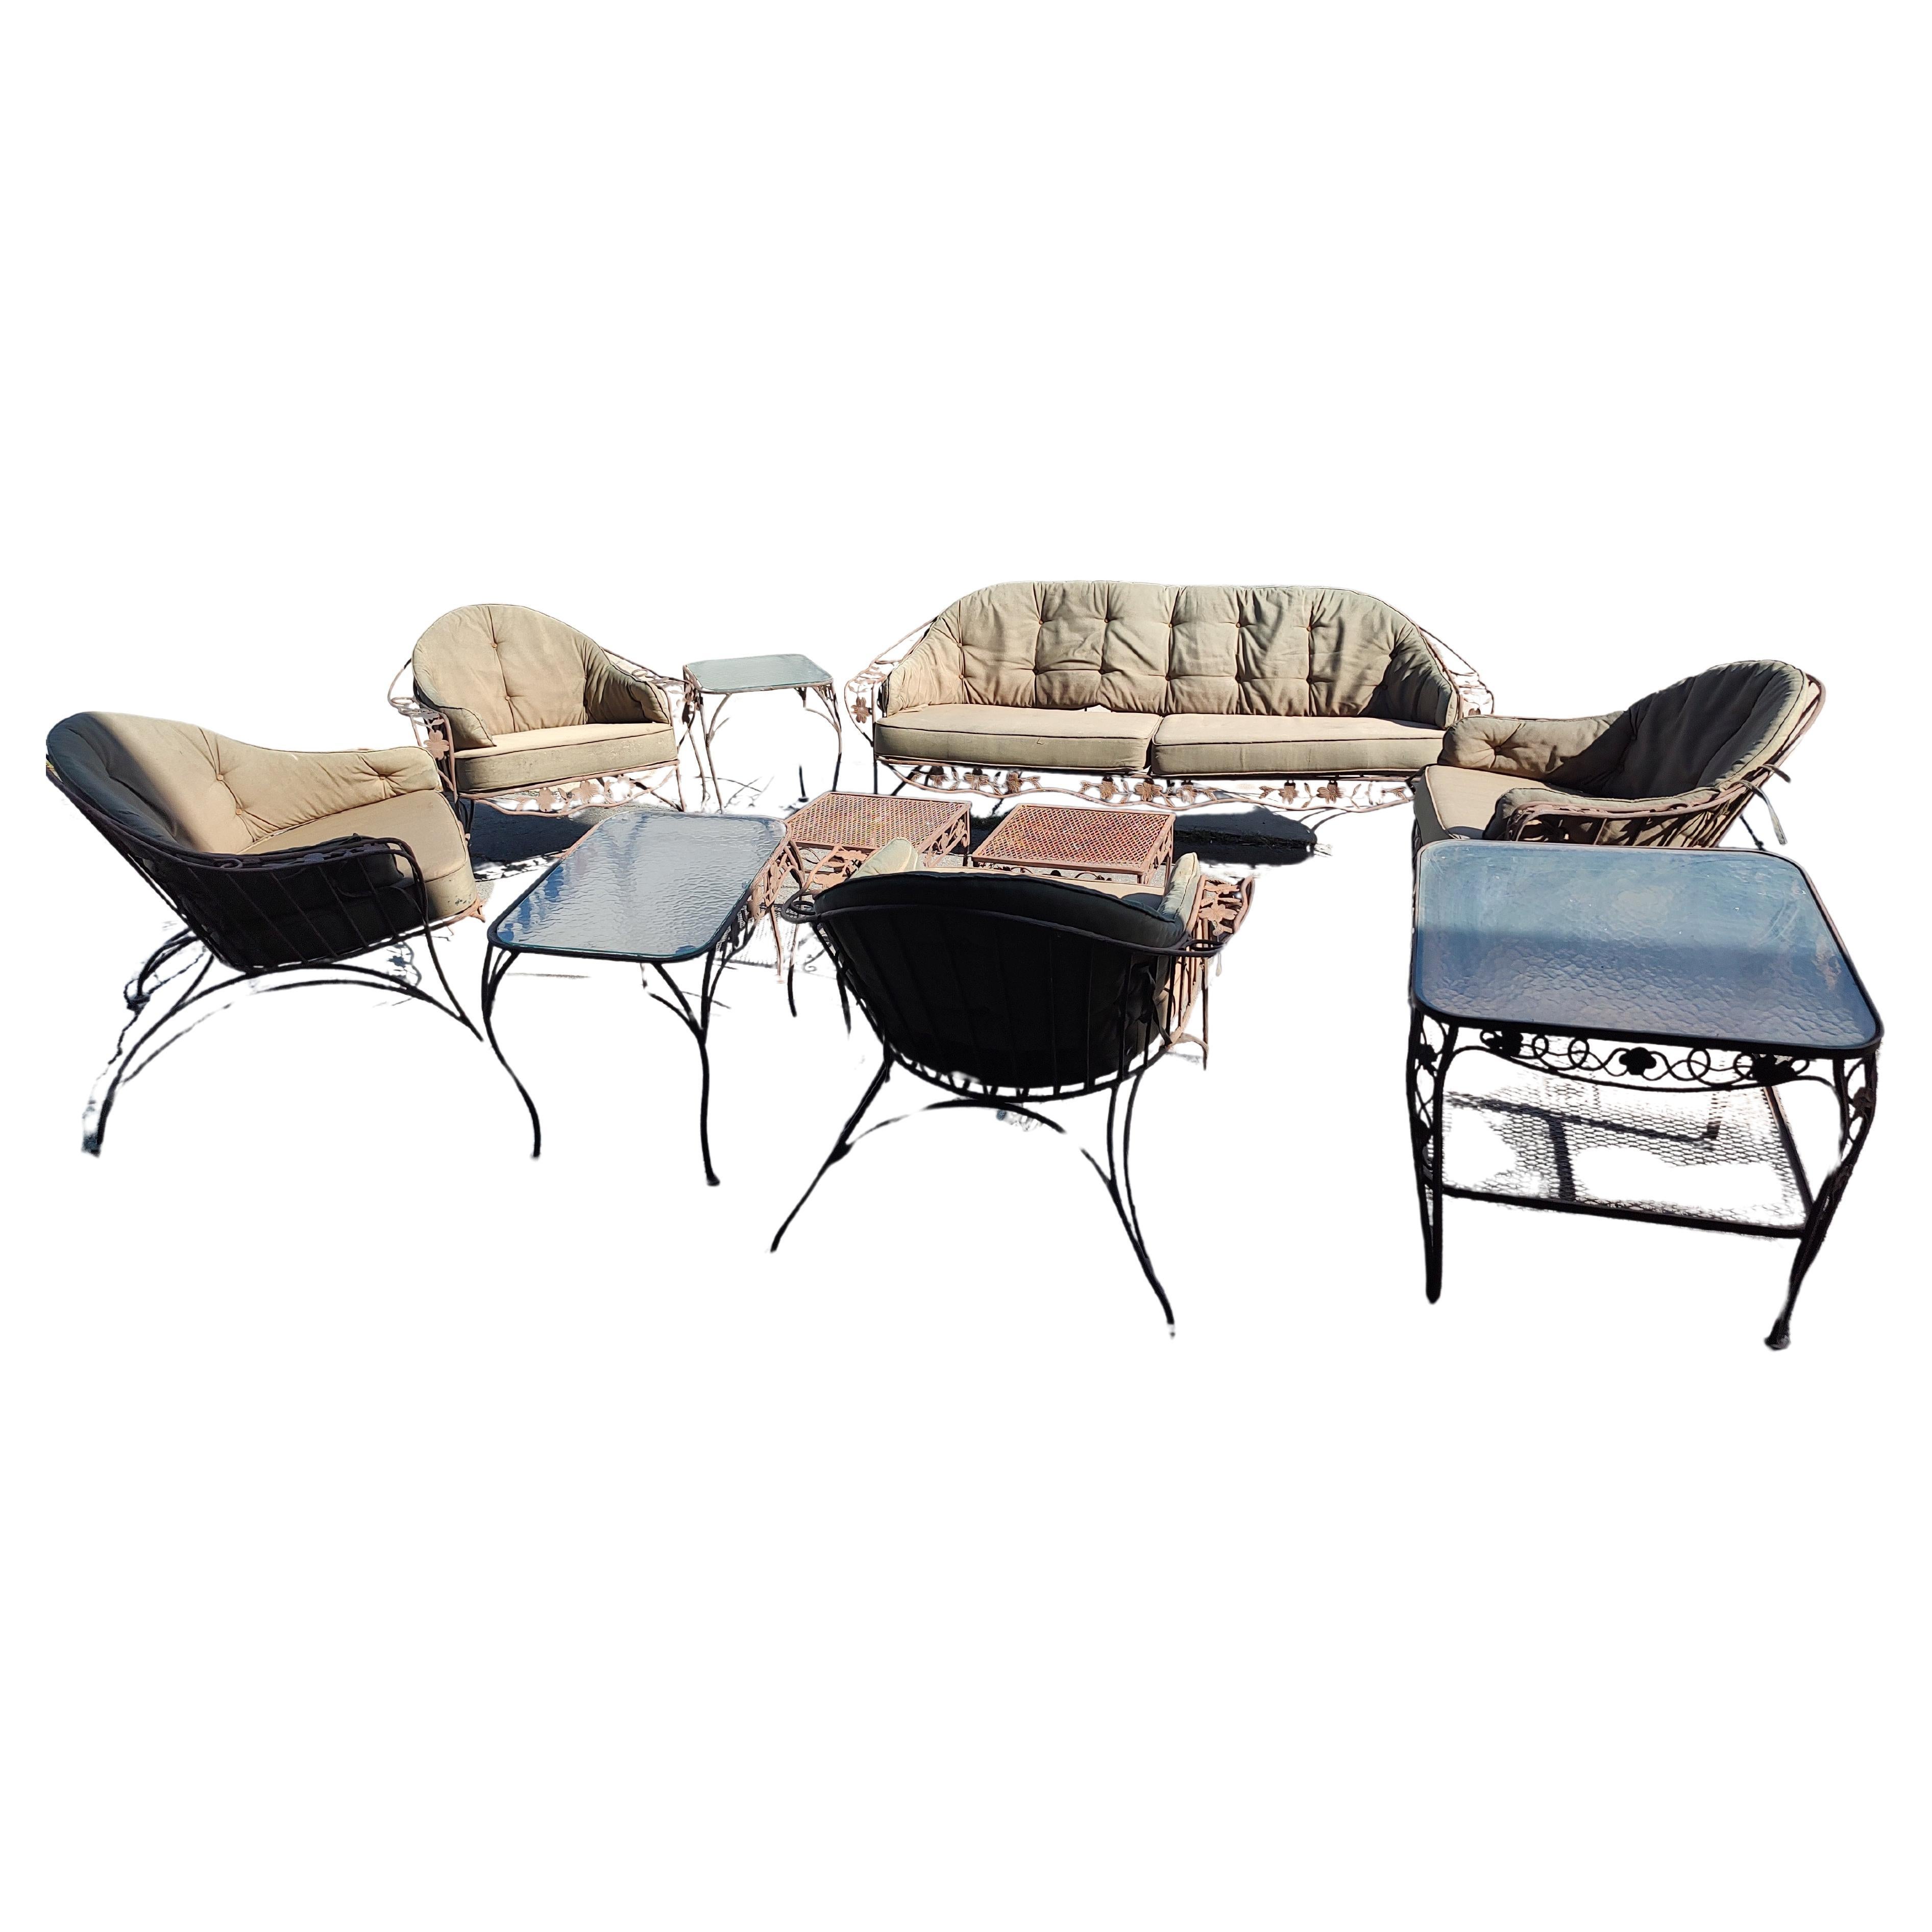  10 Piece Set of Woodard Patio Pool Set Chantilly Rose 4 Chairs Sofa 5 Tables For Sale